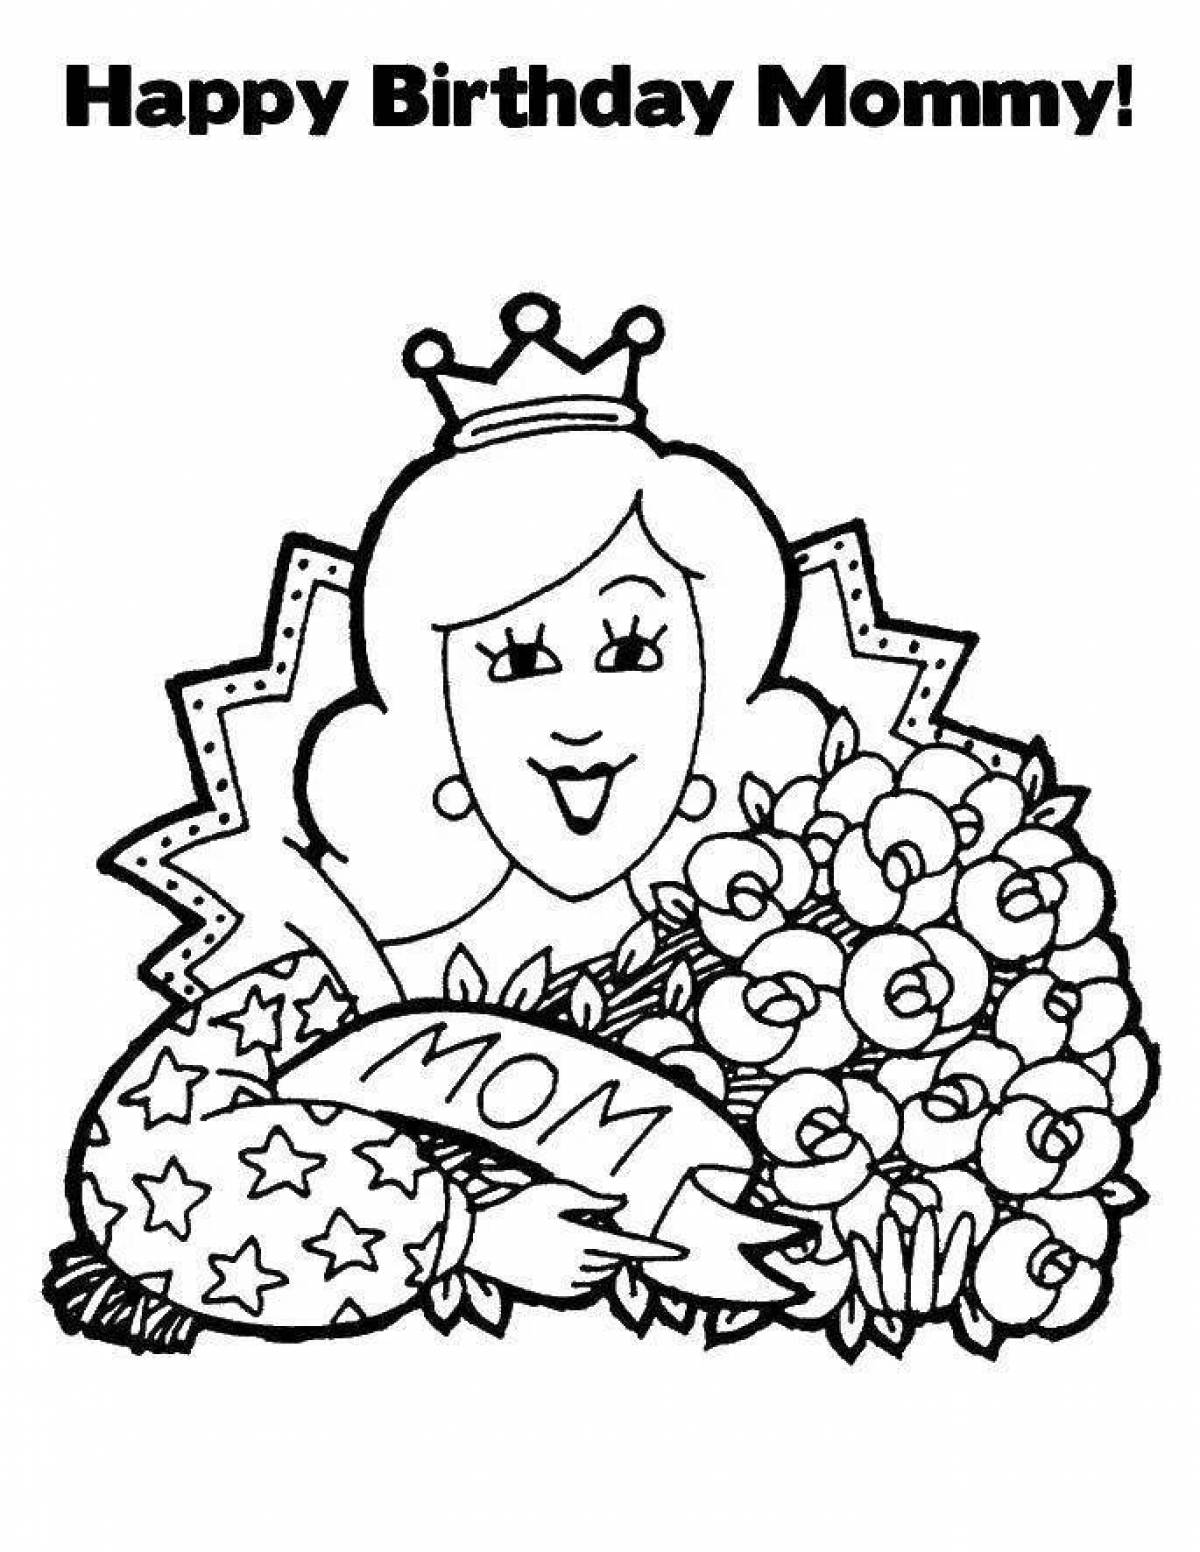 Happy birthday gorgeous mommy coloring page